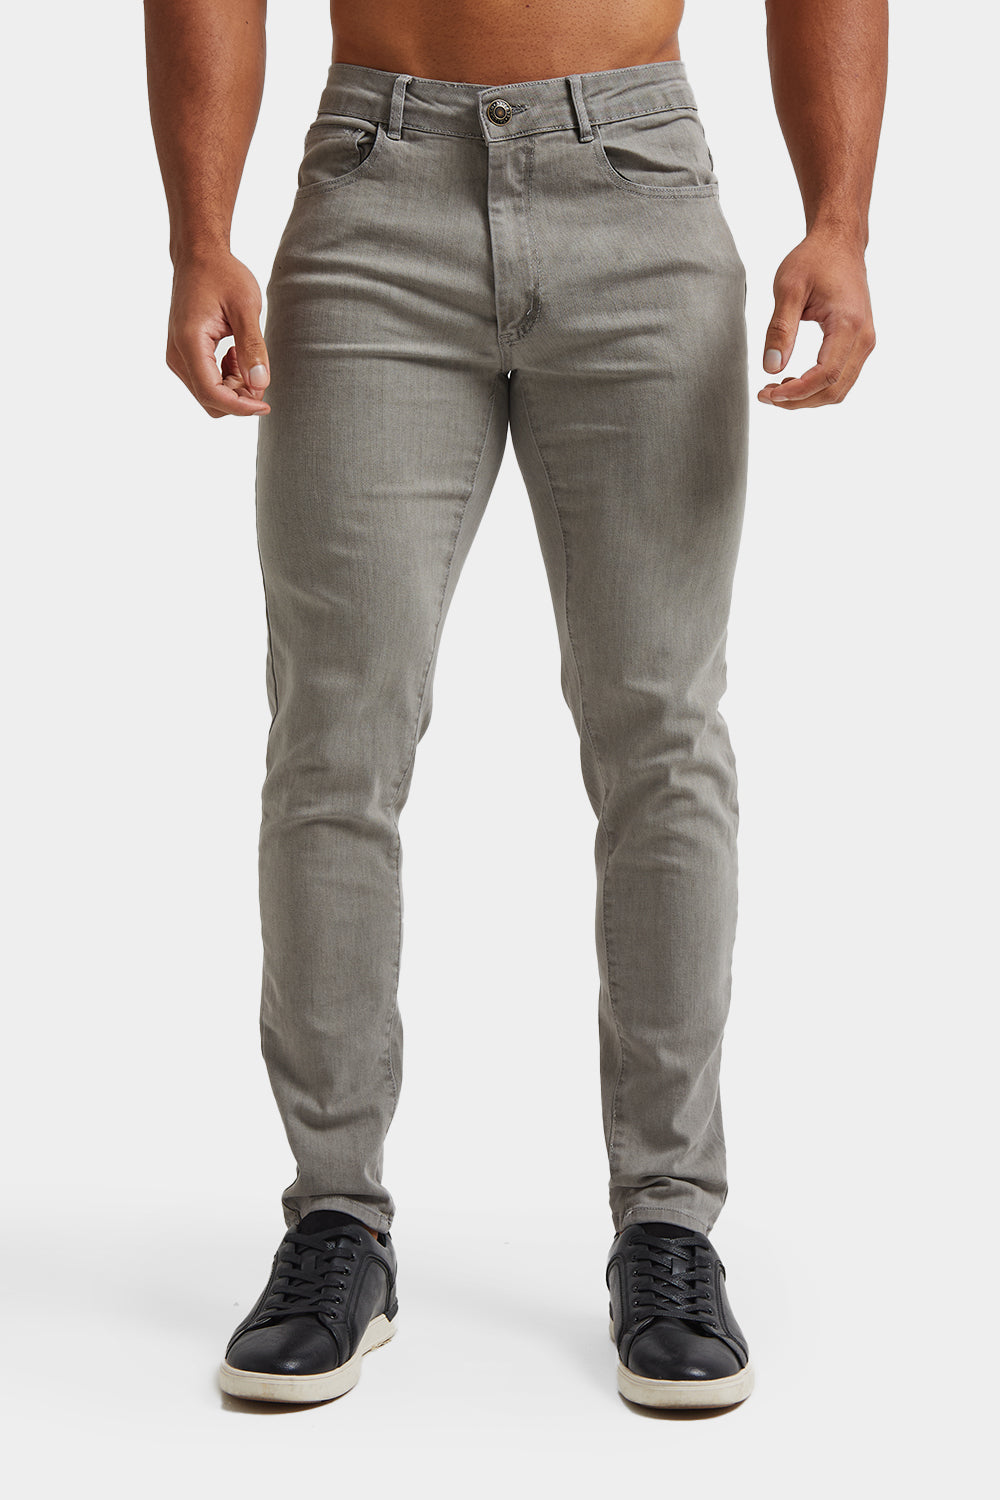 Muscle Fit Jeans in Light Grey